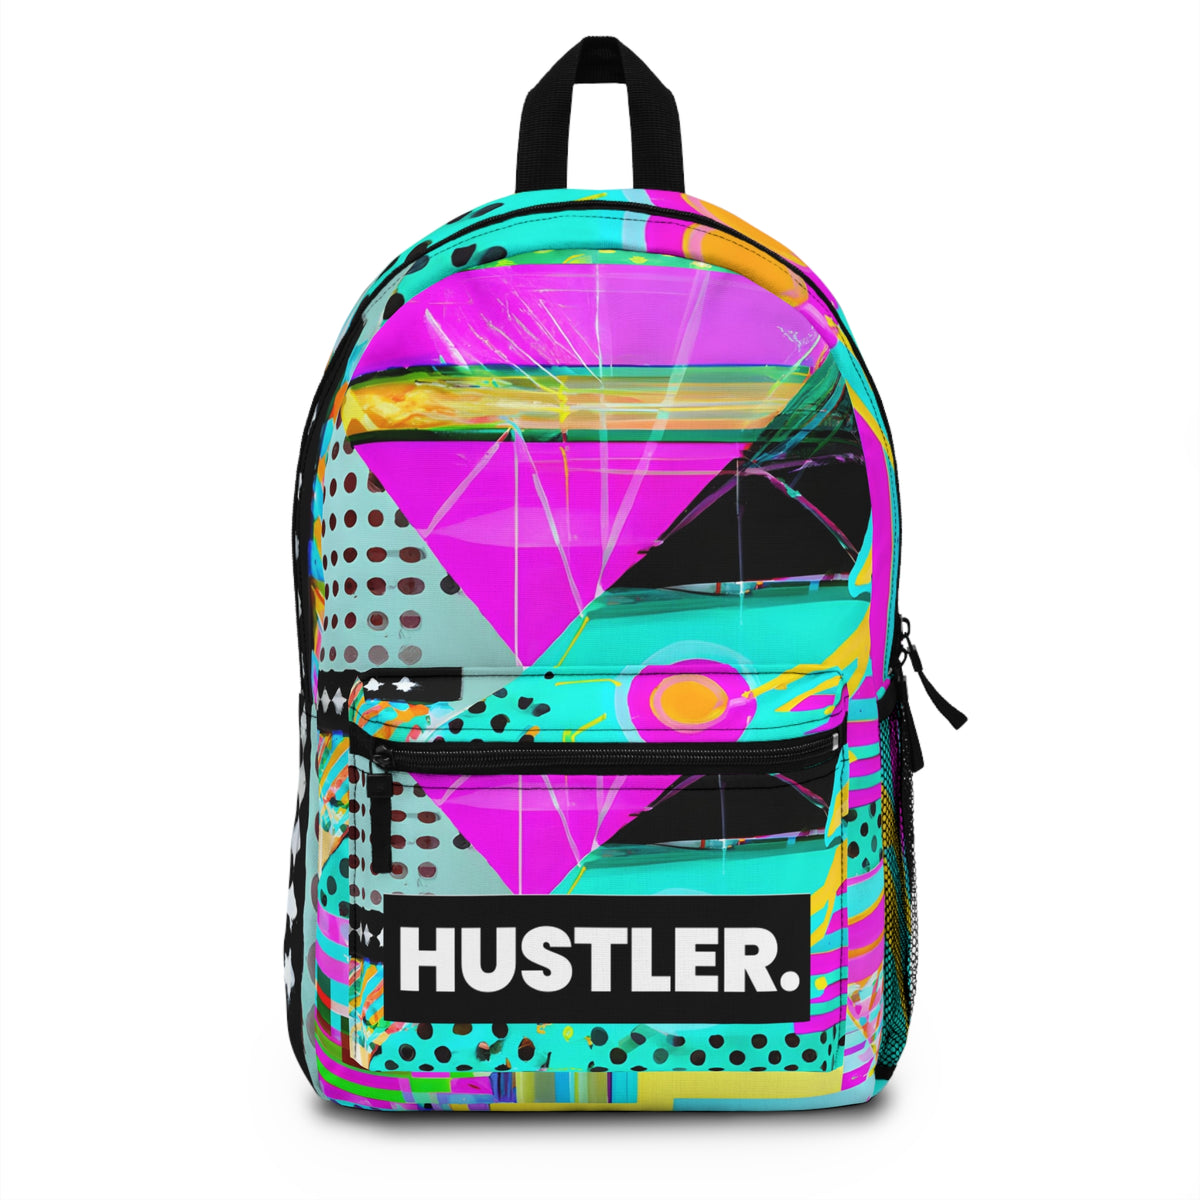 GalaxyGlo - Gay-Inspired Backpack